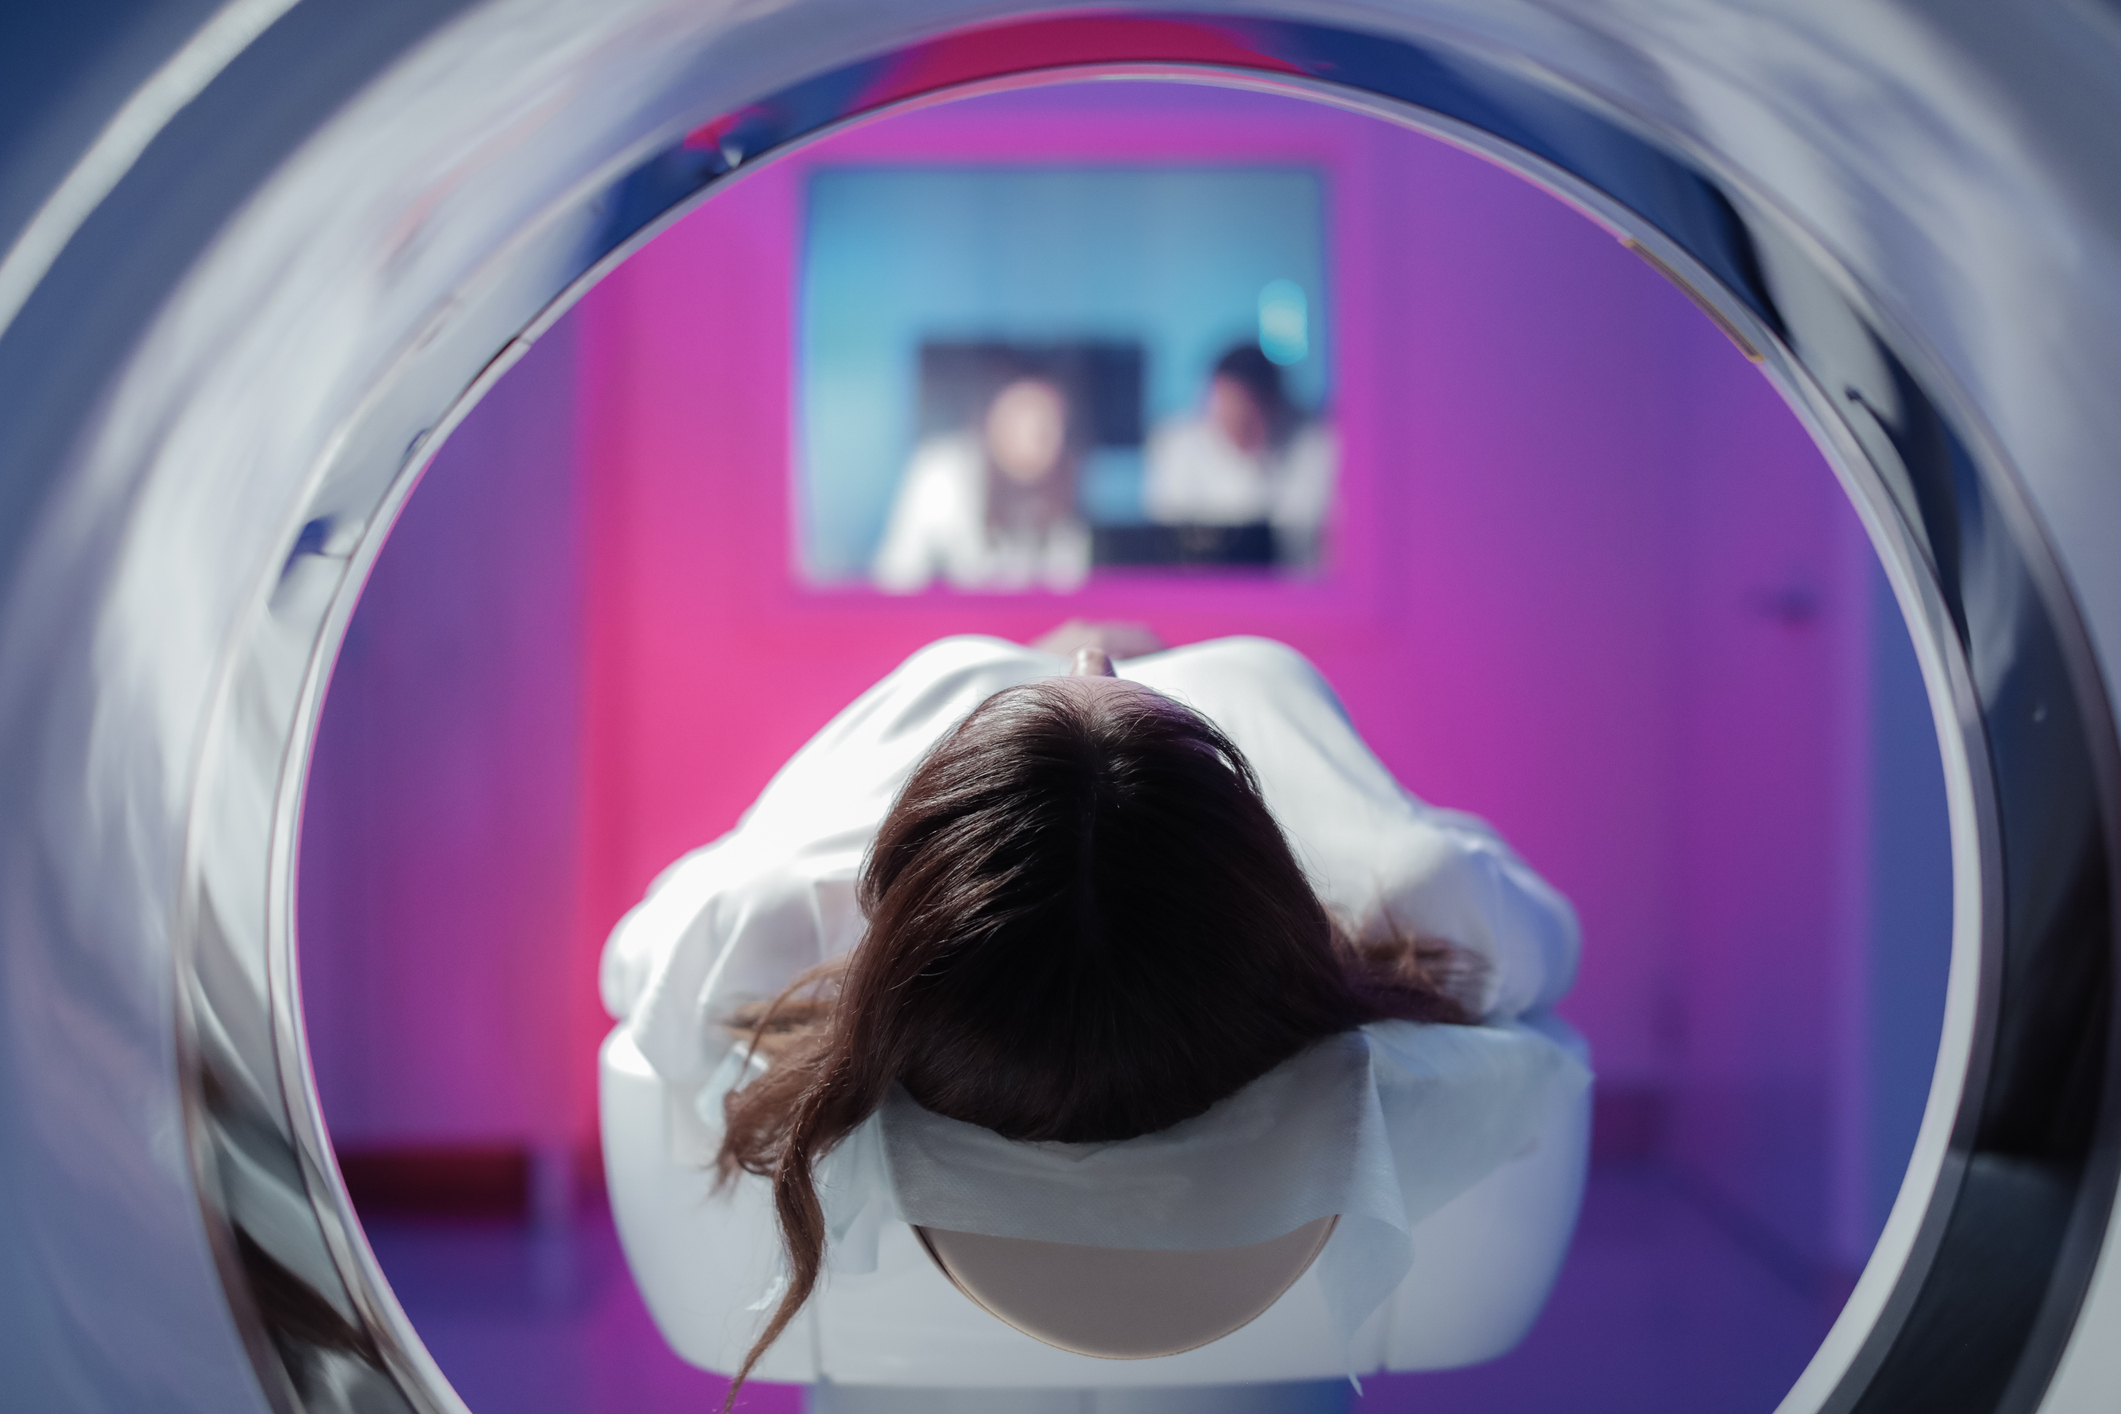 Full Body MRIs: A Board-Certified Radiologist’s Opinion